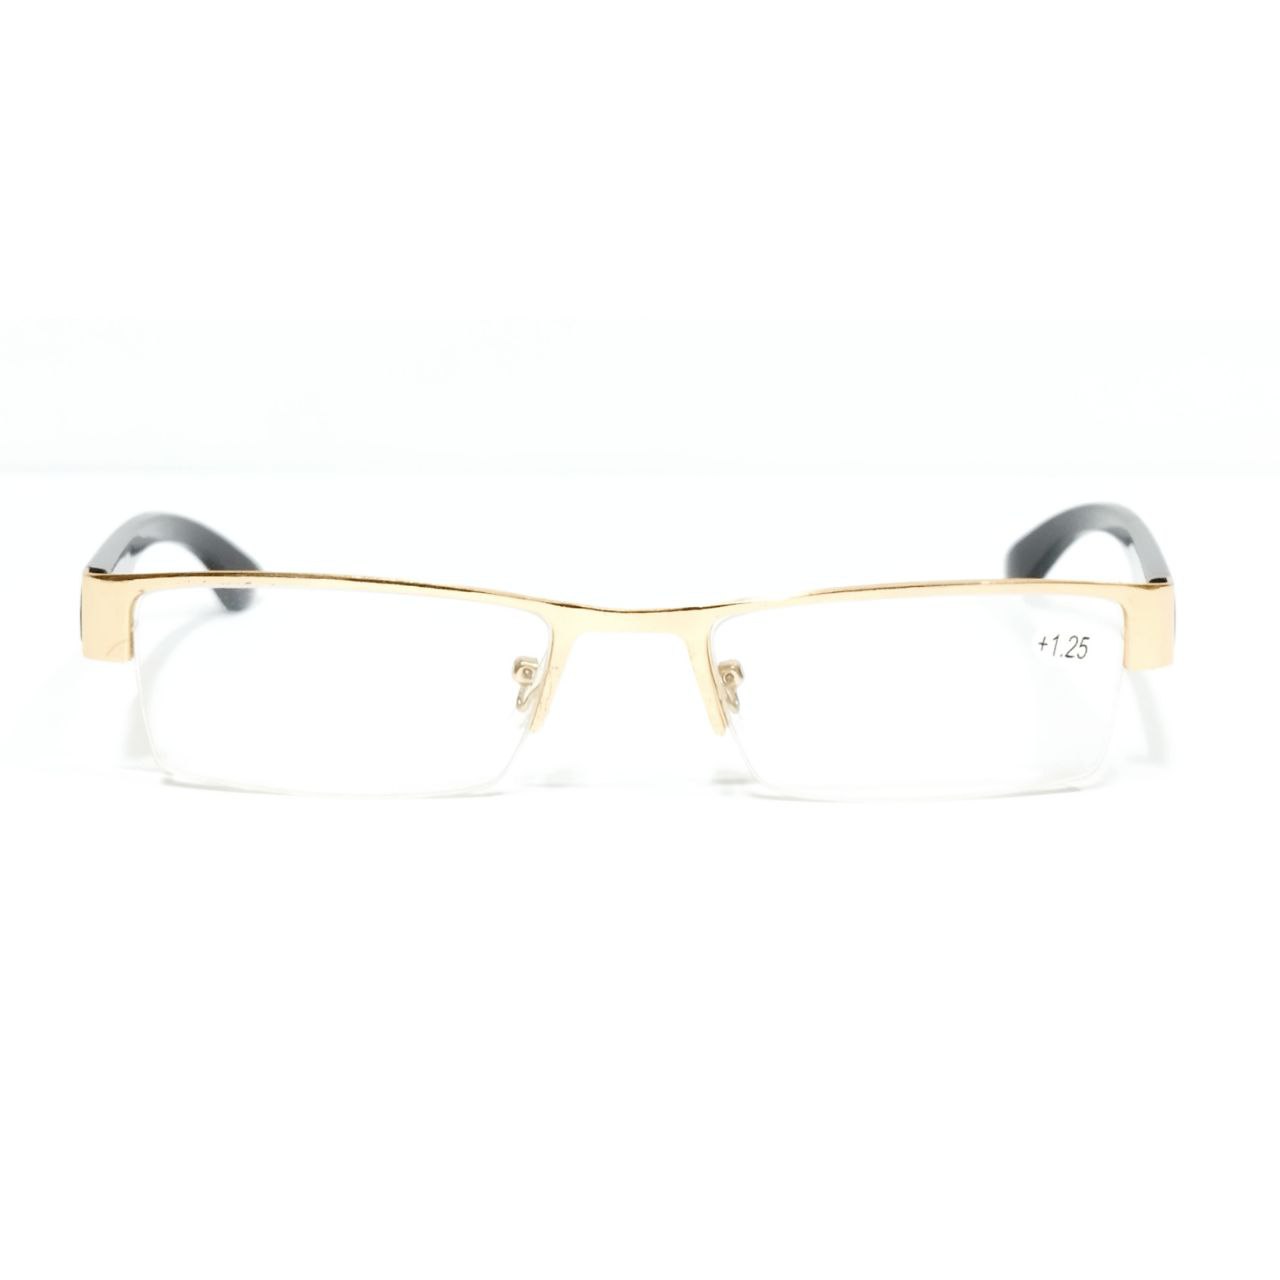 Stylish Gold Supra Reading Glasses with Blue Light Protection